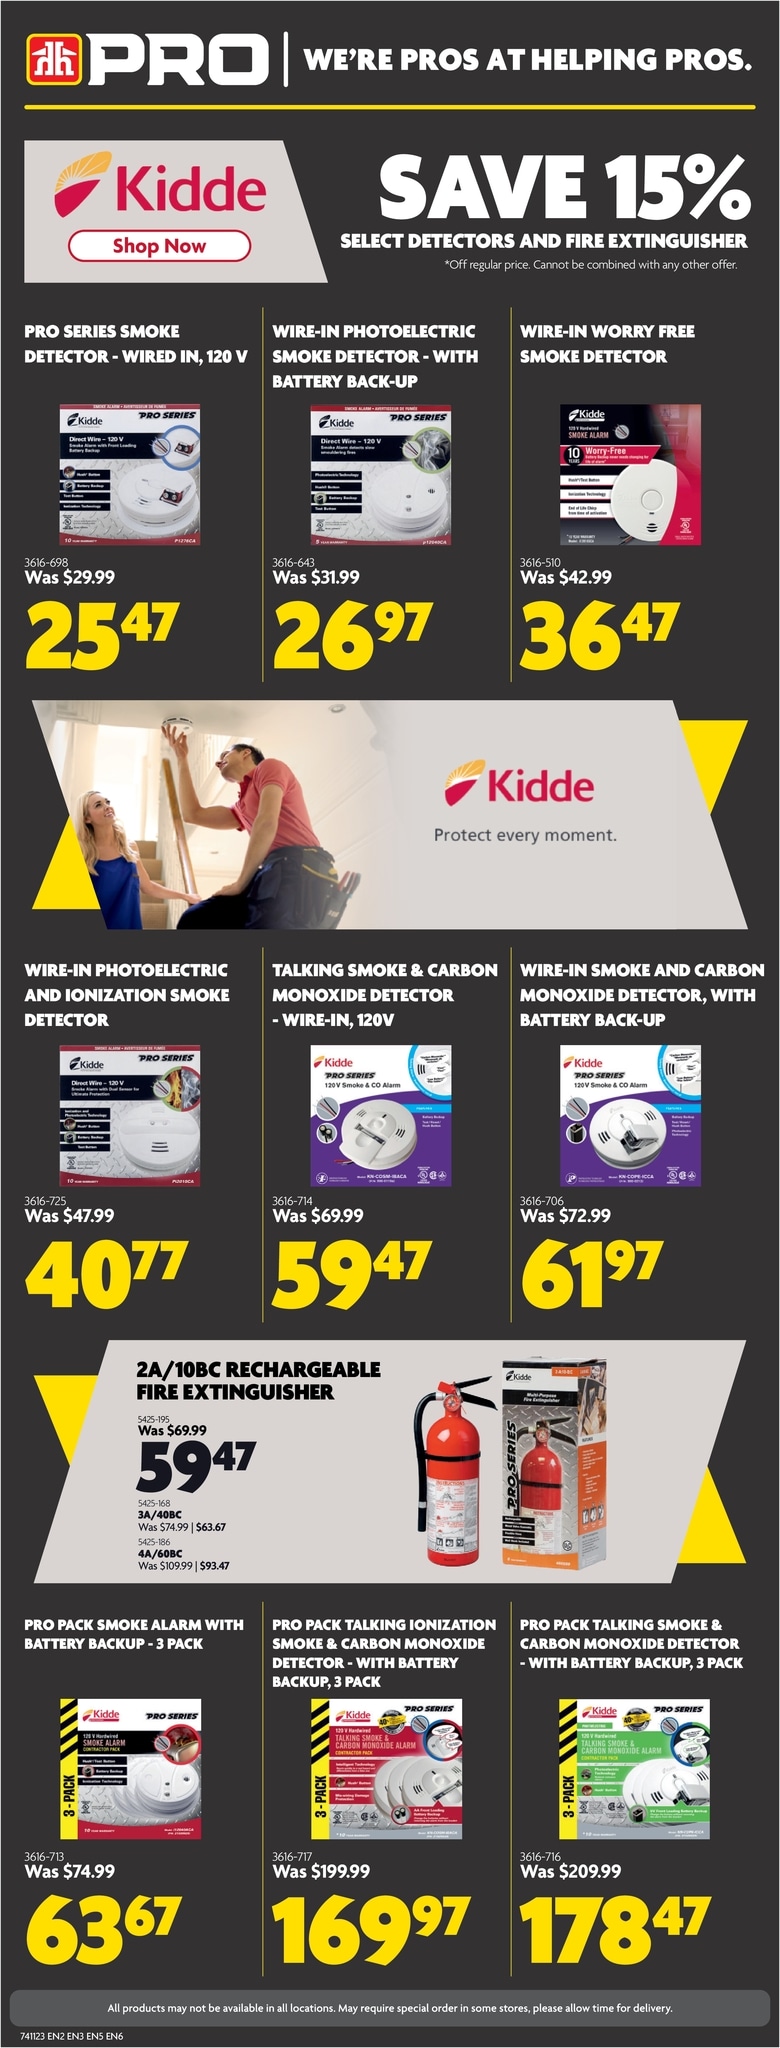 Home Hardware - PRO - Page 4